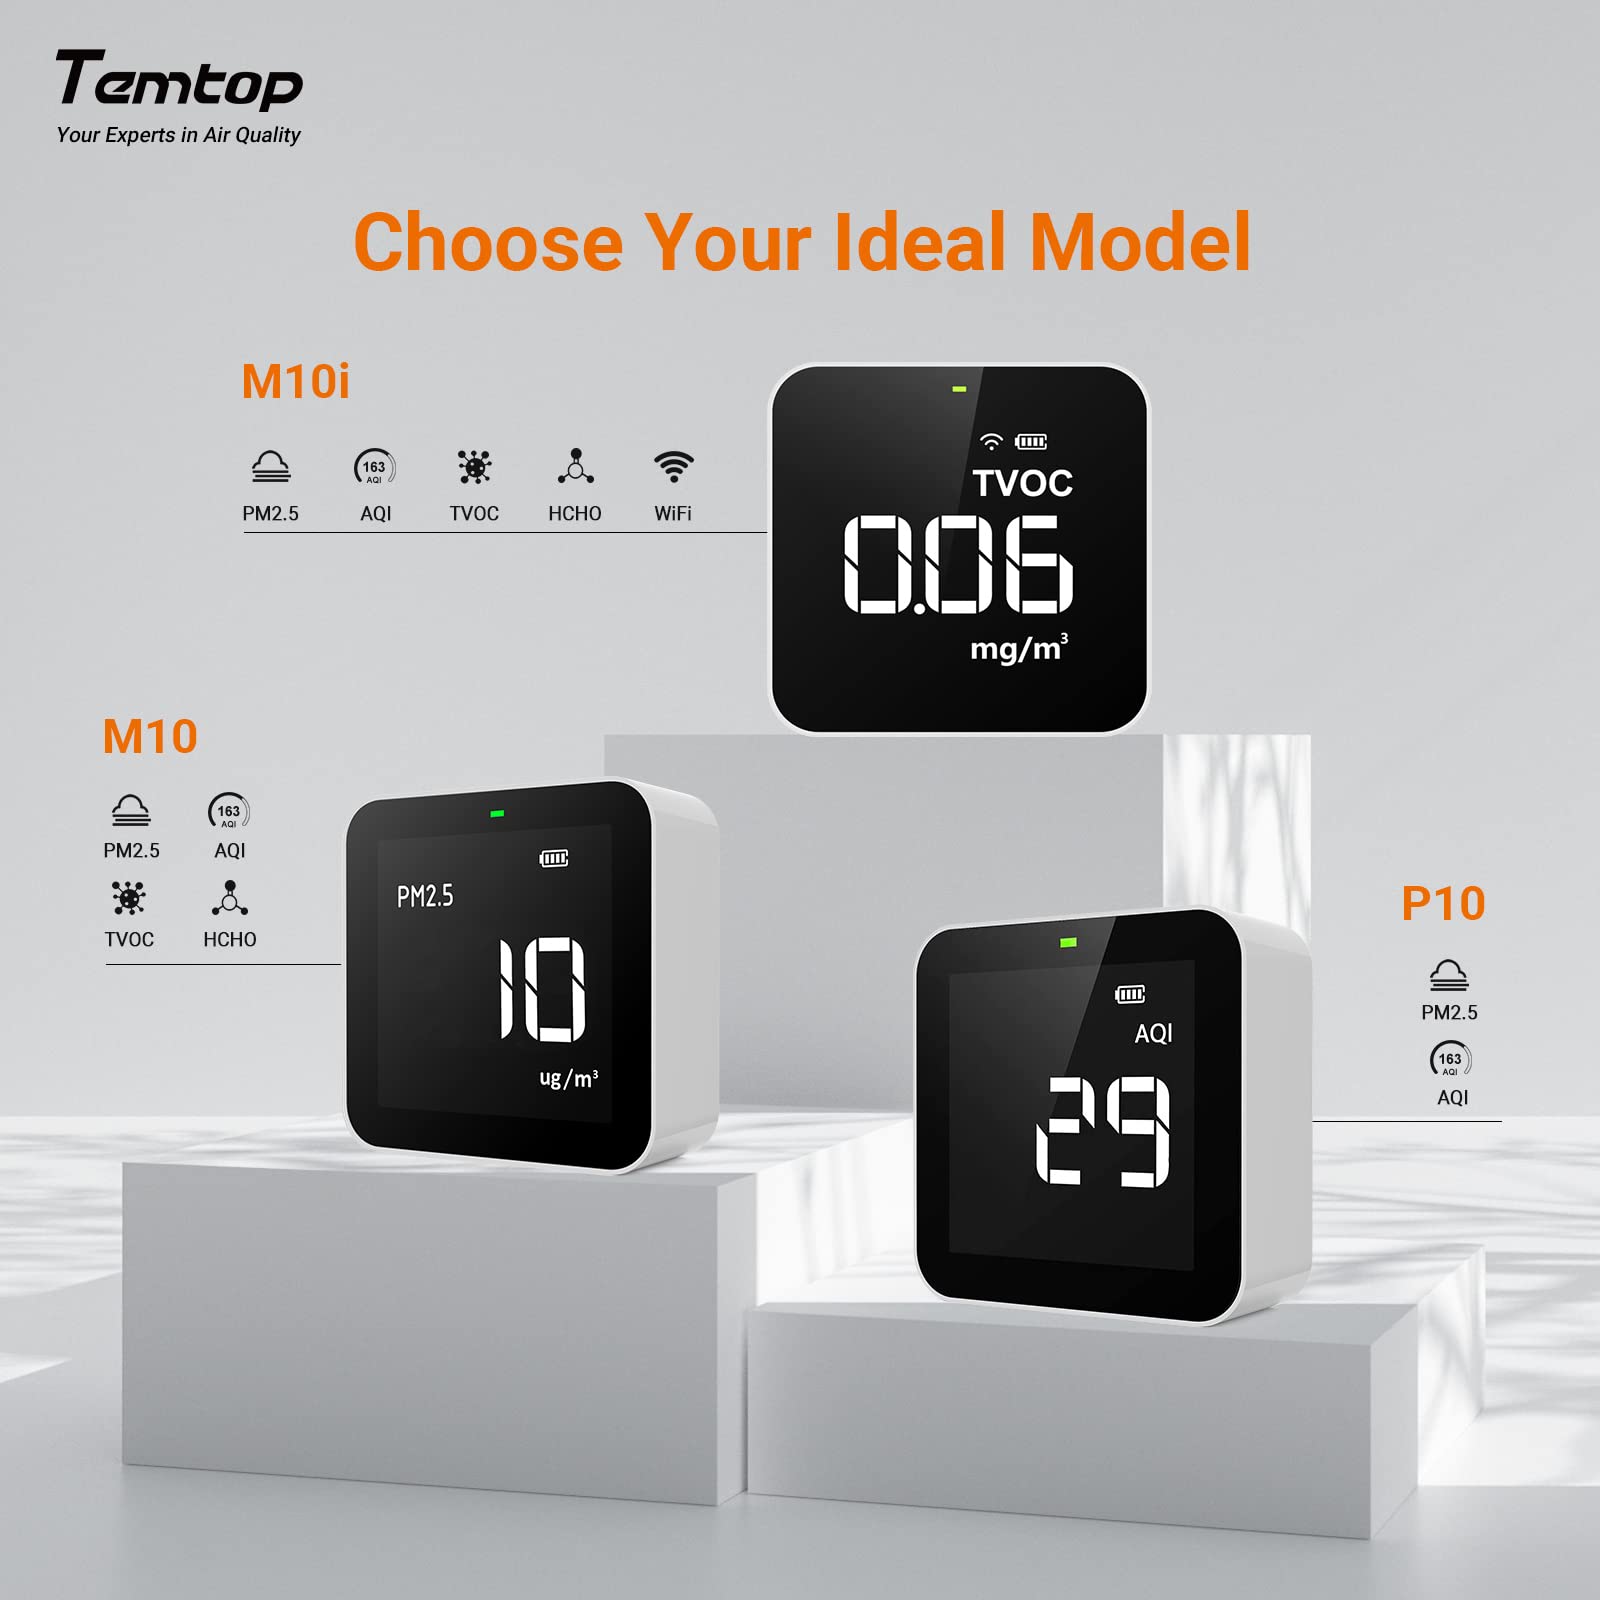 Temtop M100 8 in 1 Air Quality Monitor For CO2 PM2.5 PM10 AQI Temperat